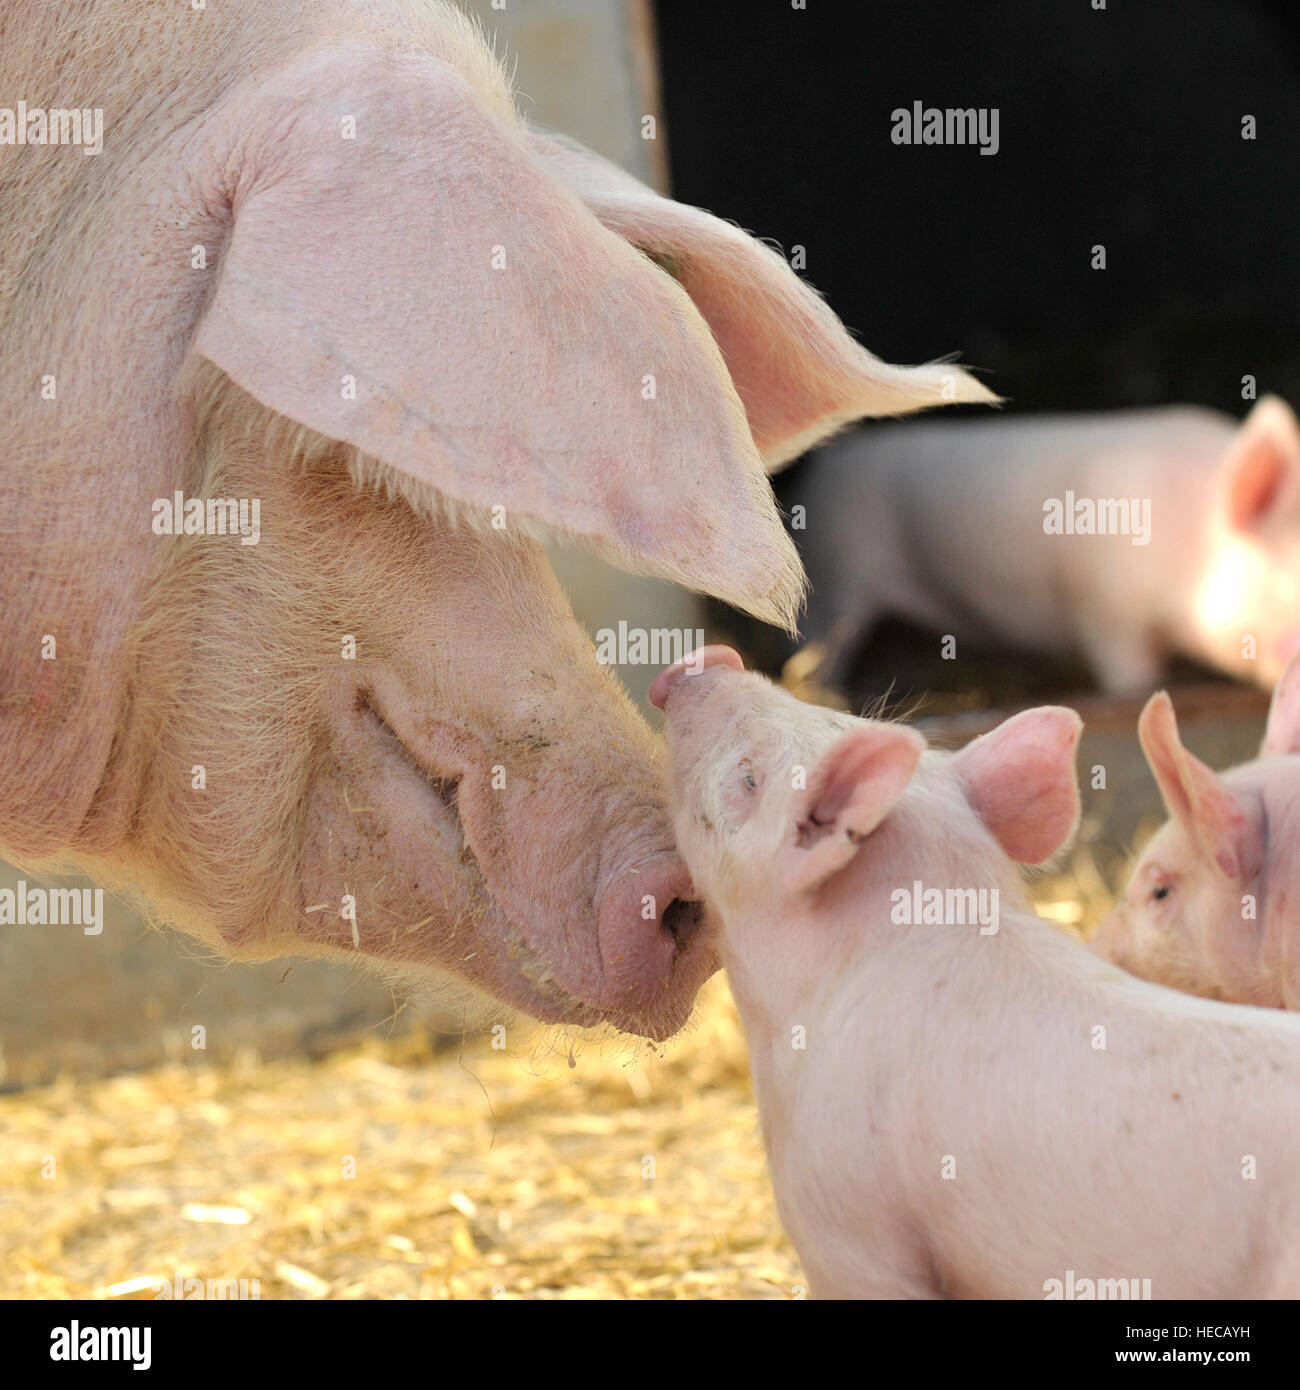 female pig and piglet Stock Photo